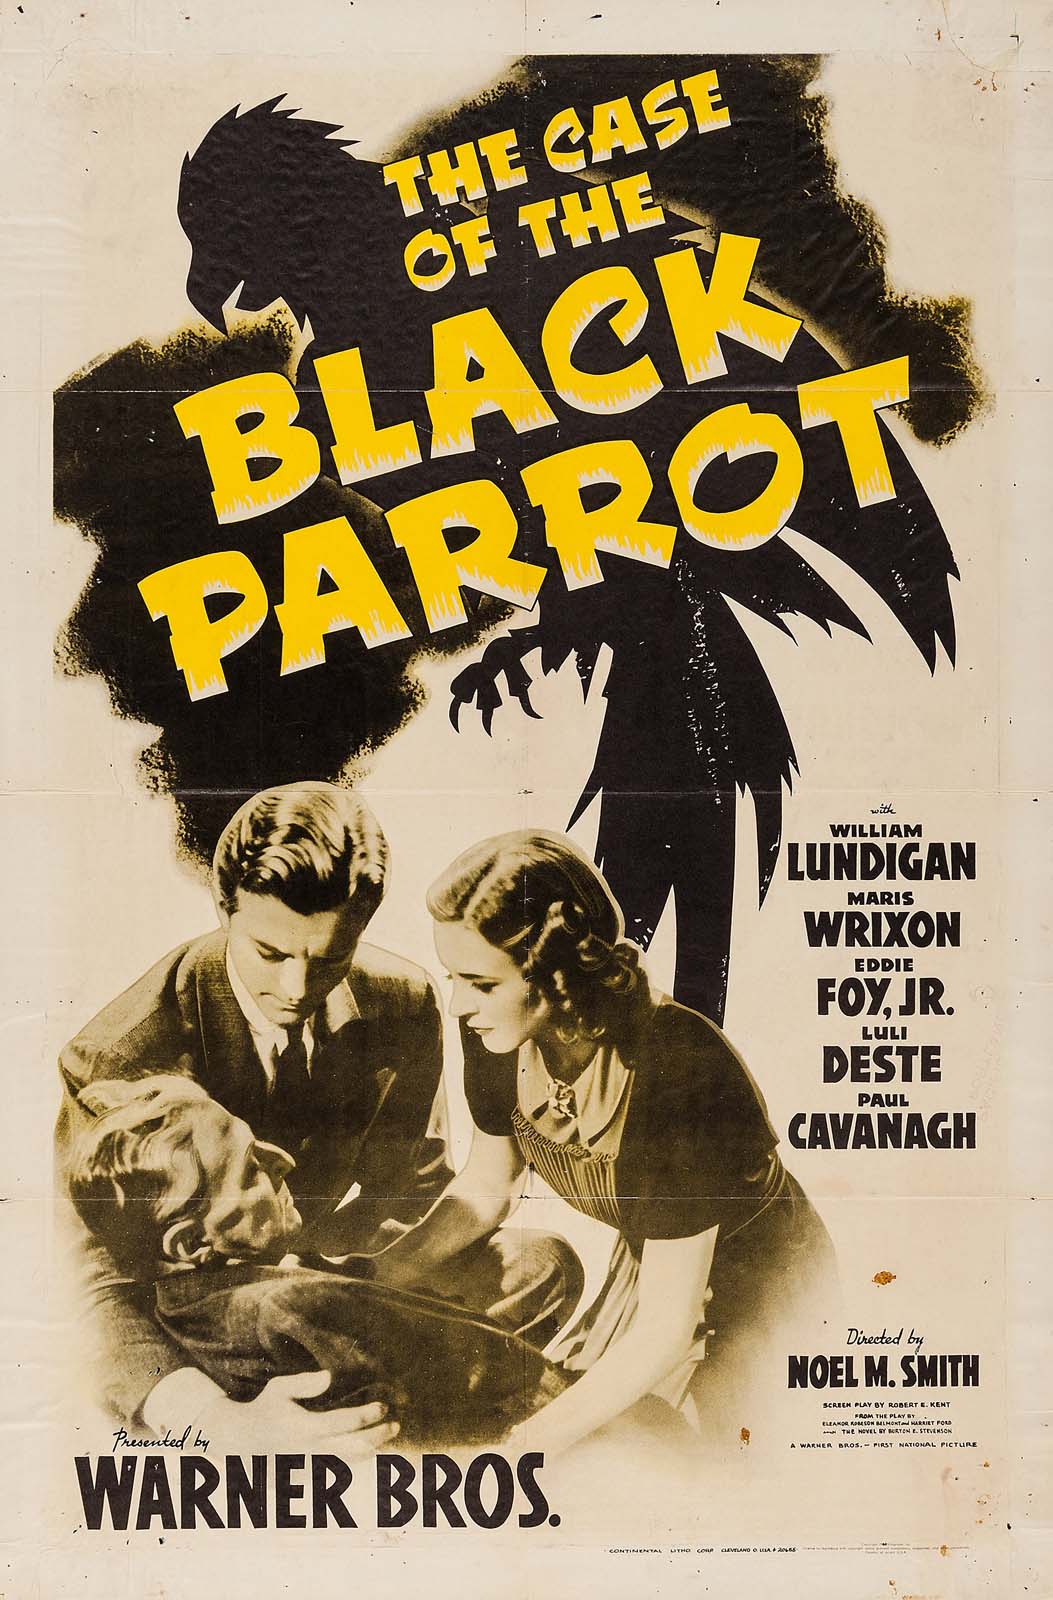 CASE OF THE BLACK PARROT, THE